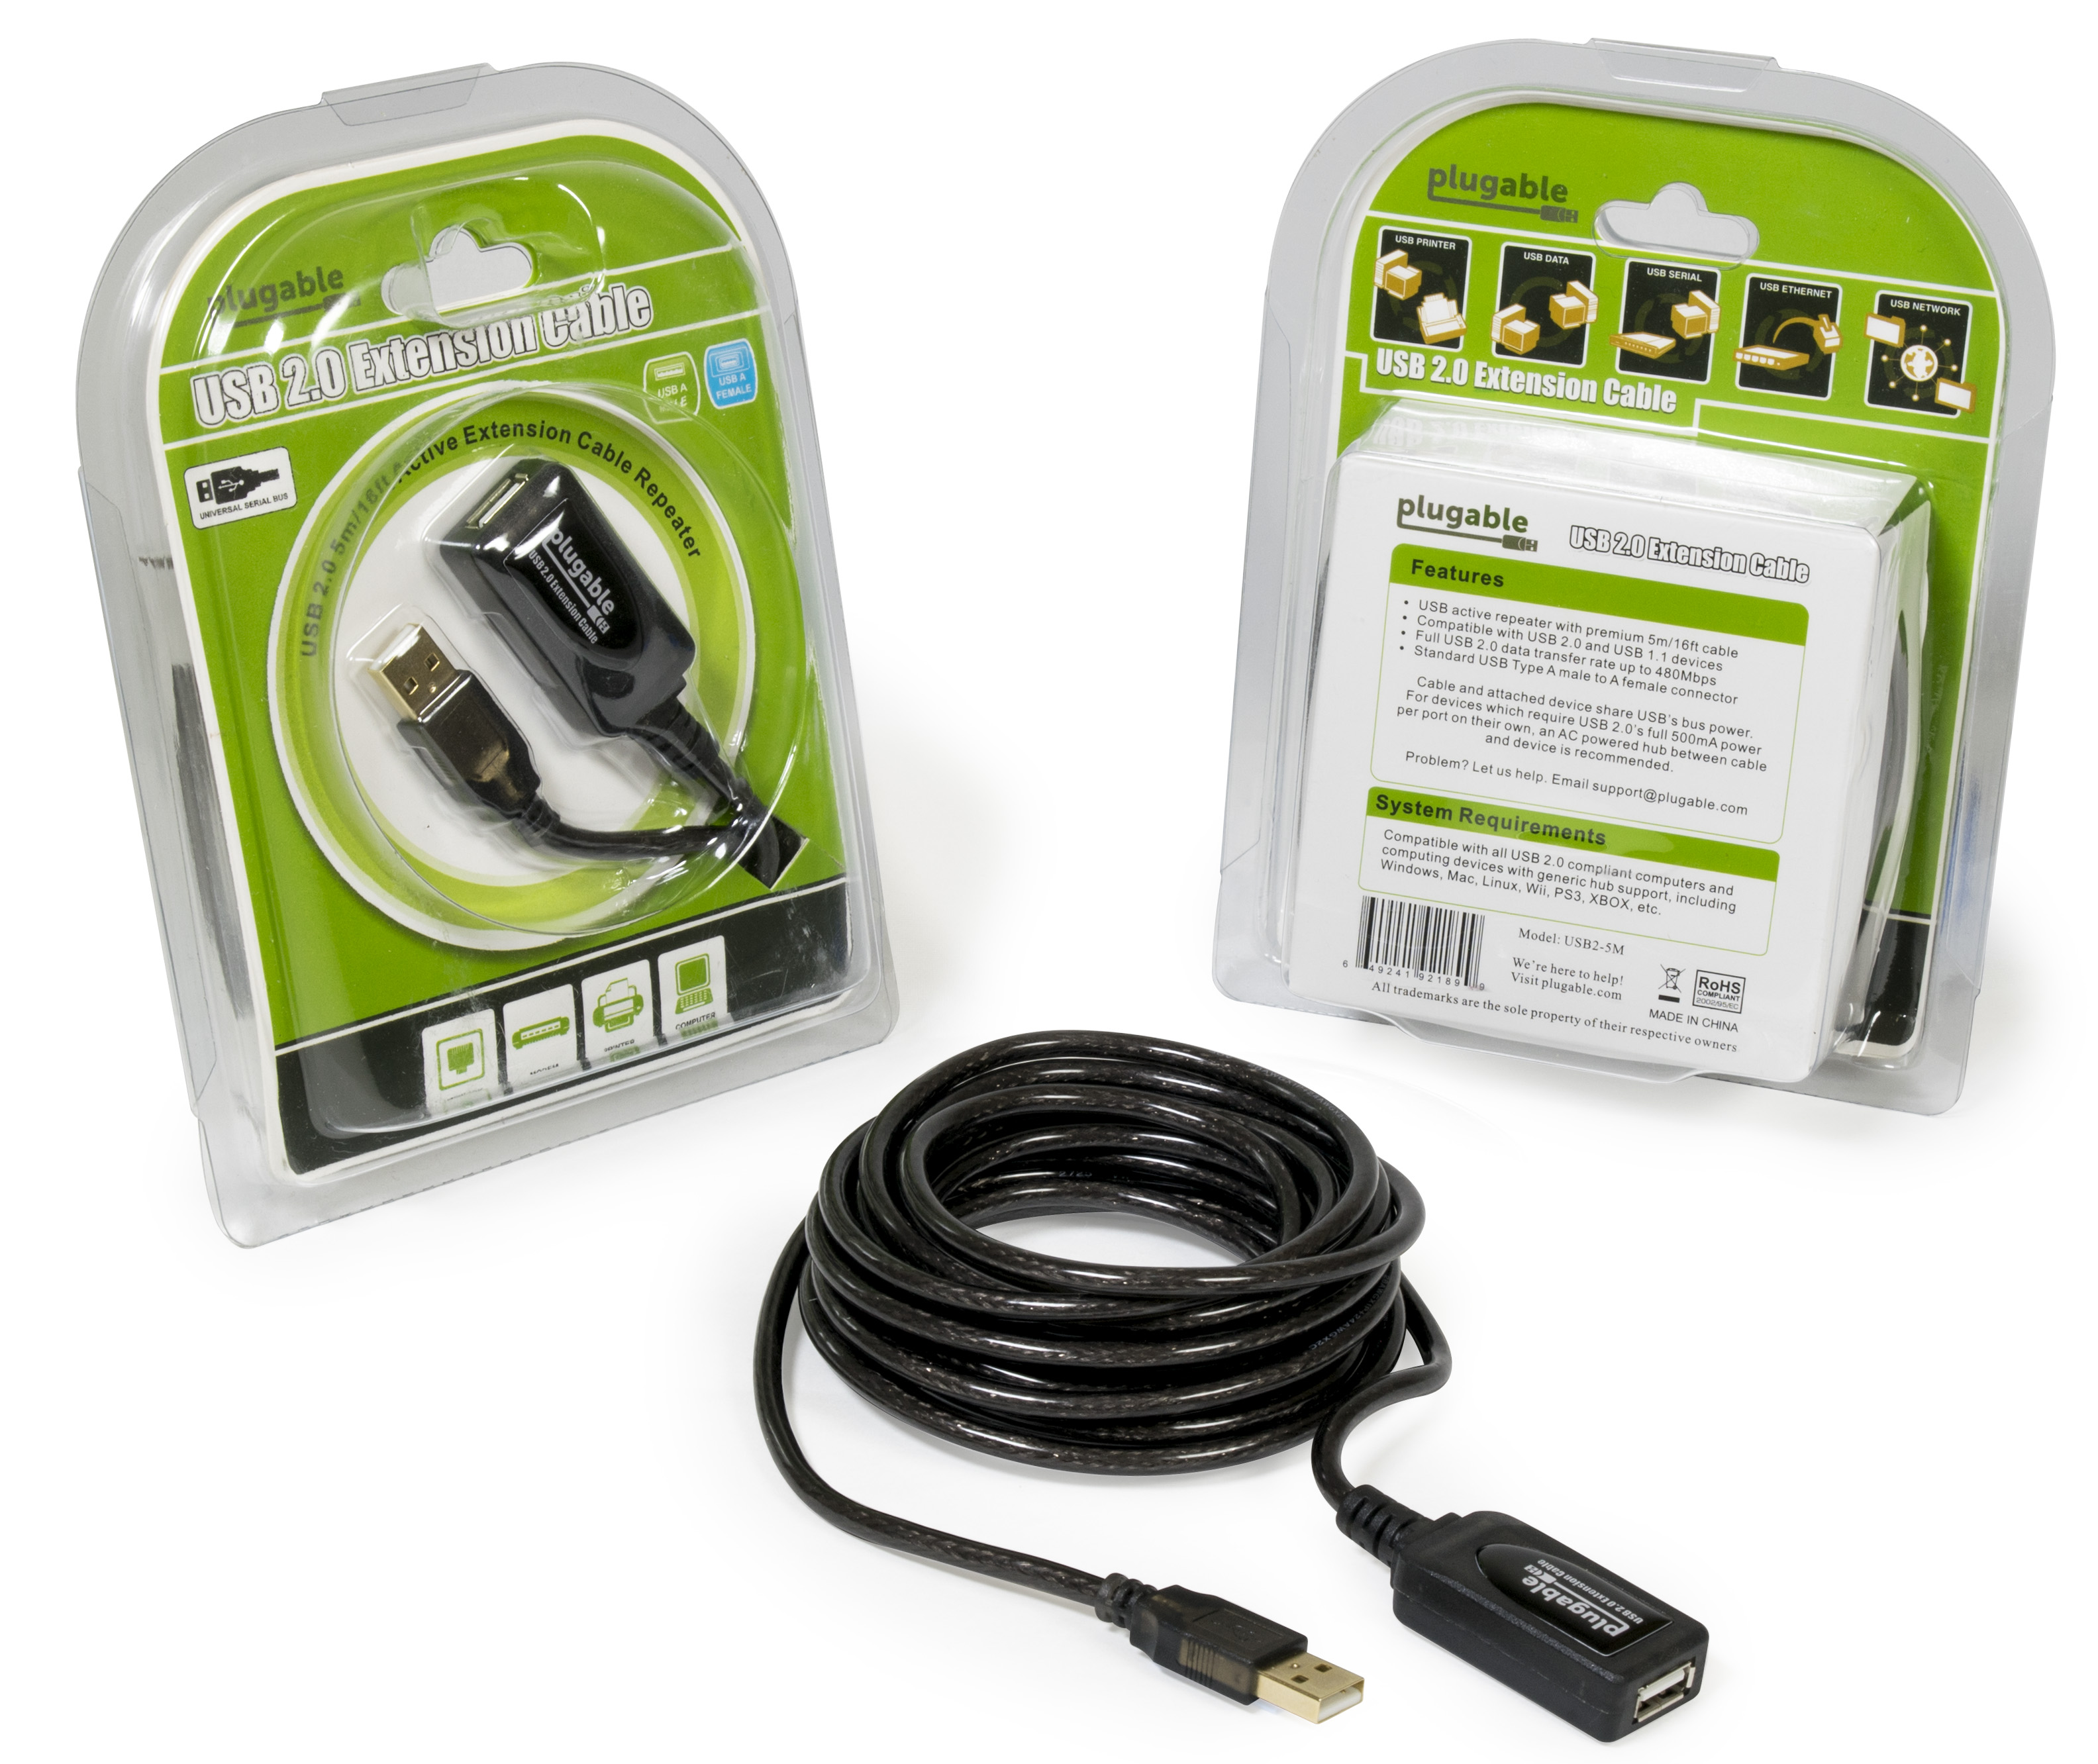 Plugable 5 Meter (16 Foot) USB 2.0 Active Extension Cable Type A Male to A Female - image 2 of 3